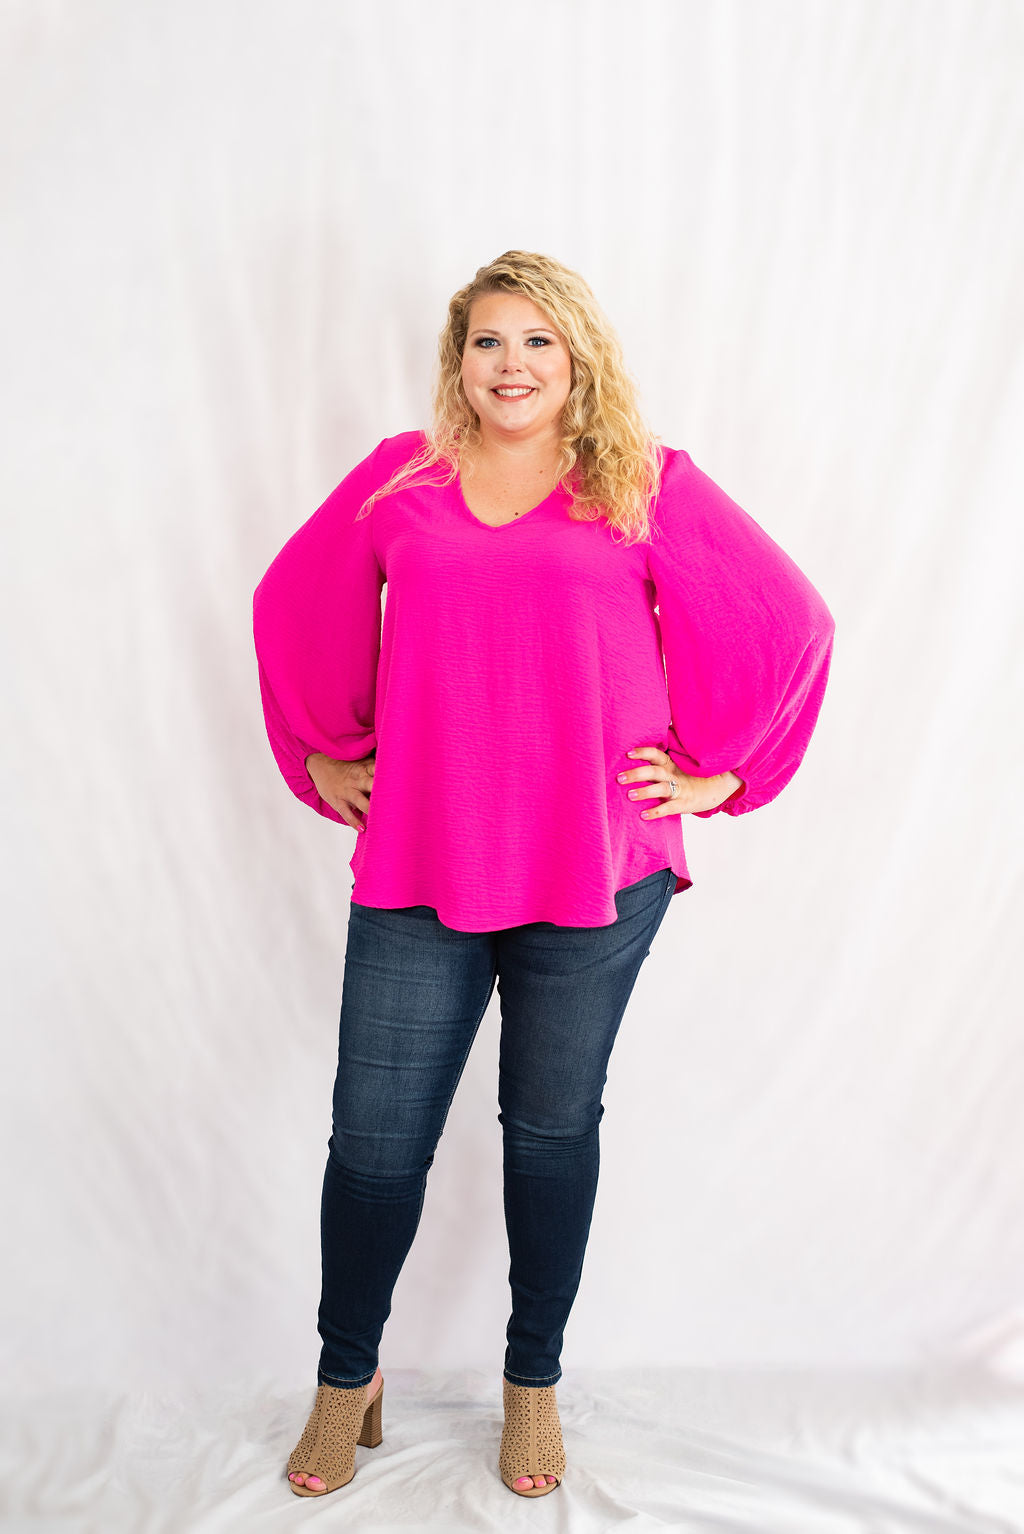 Basic Solid Blouse with Long Bubble Sleeves in Plus Size by Jodifl